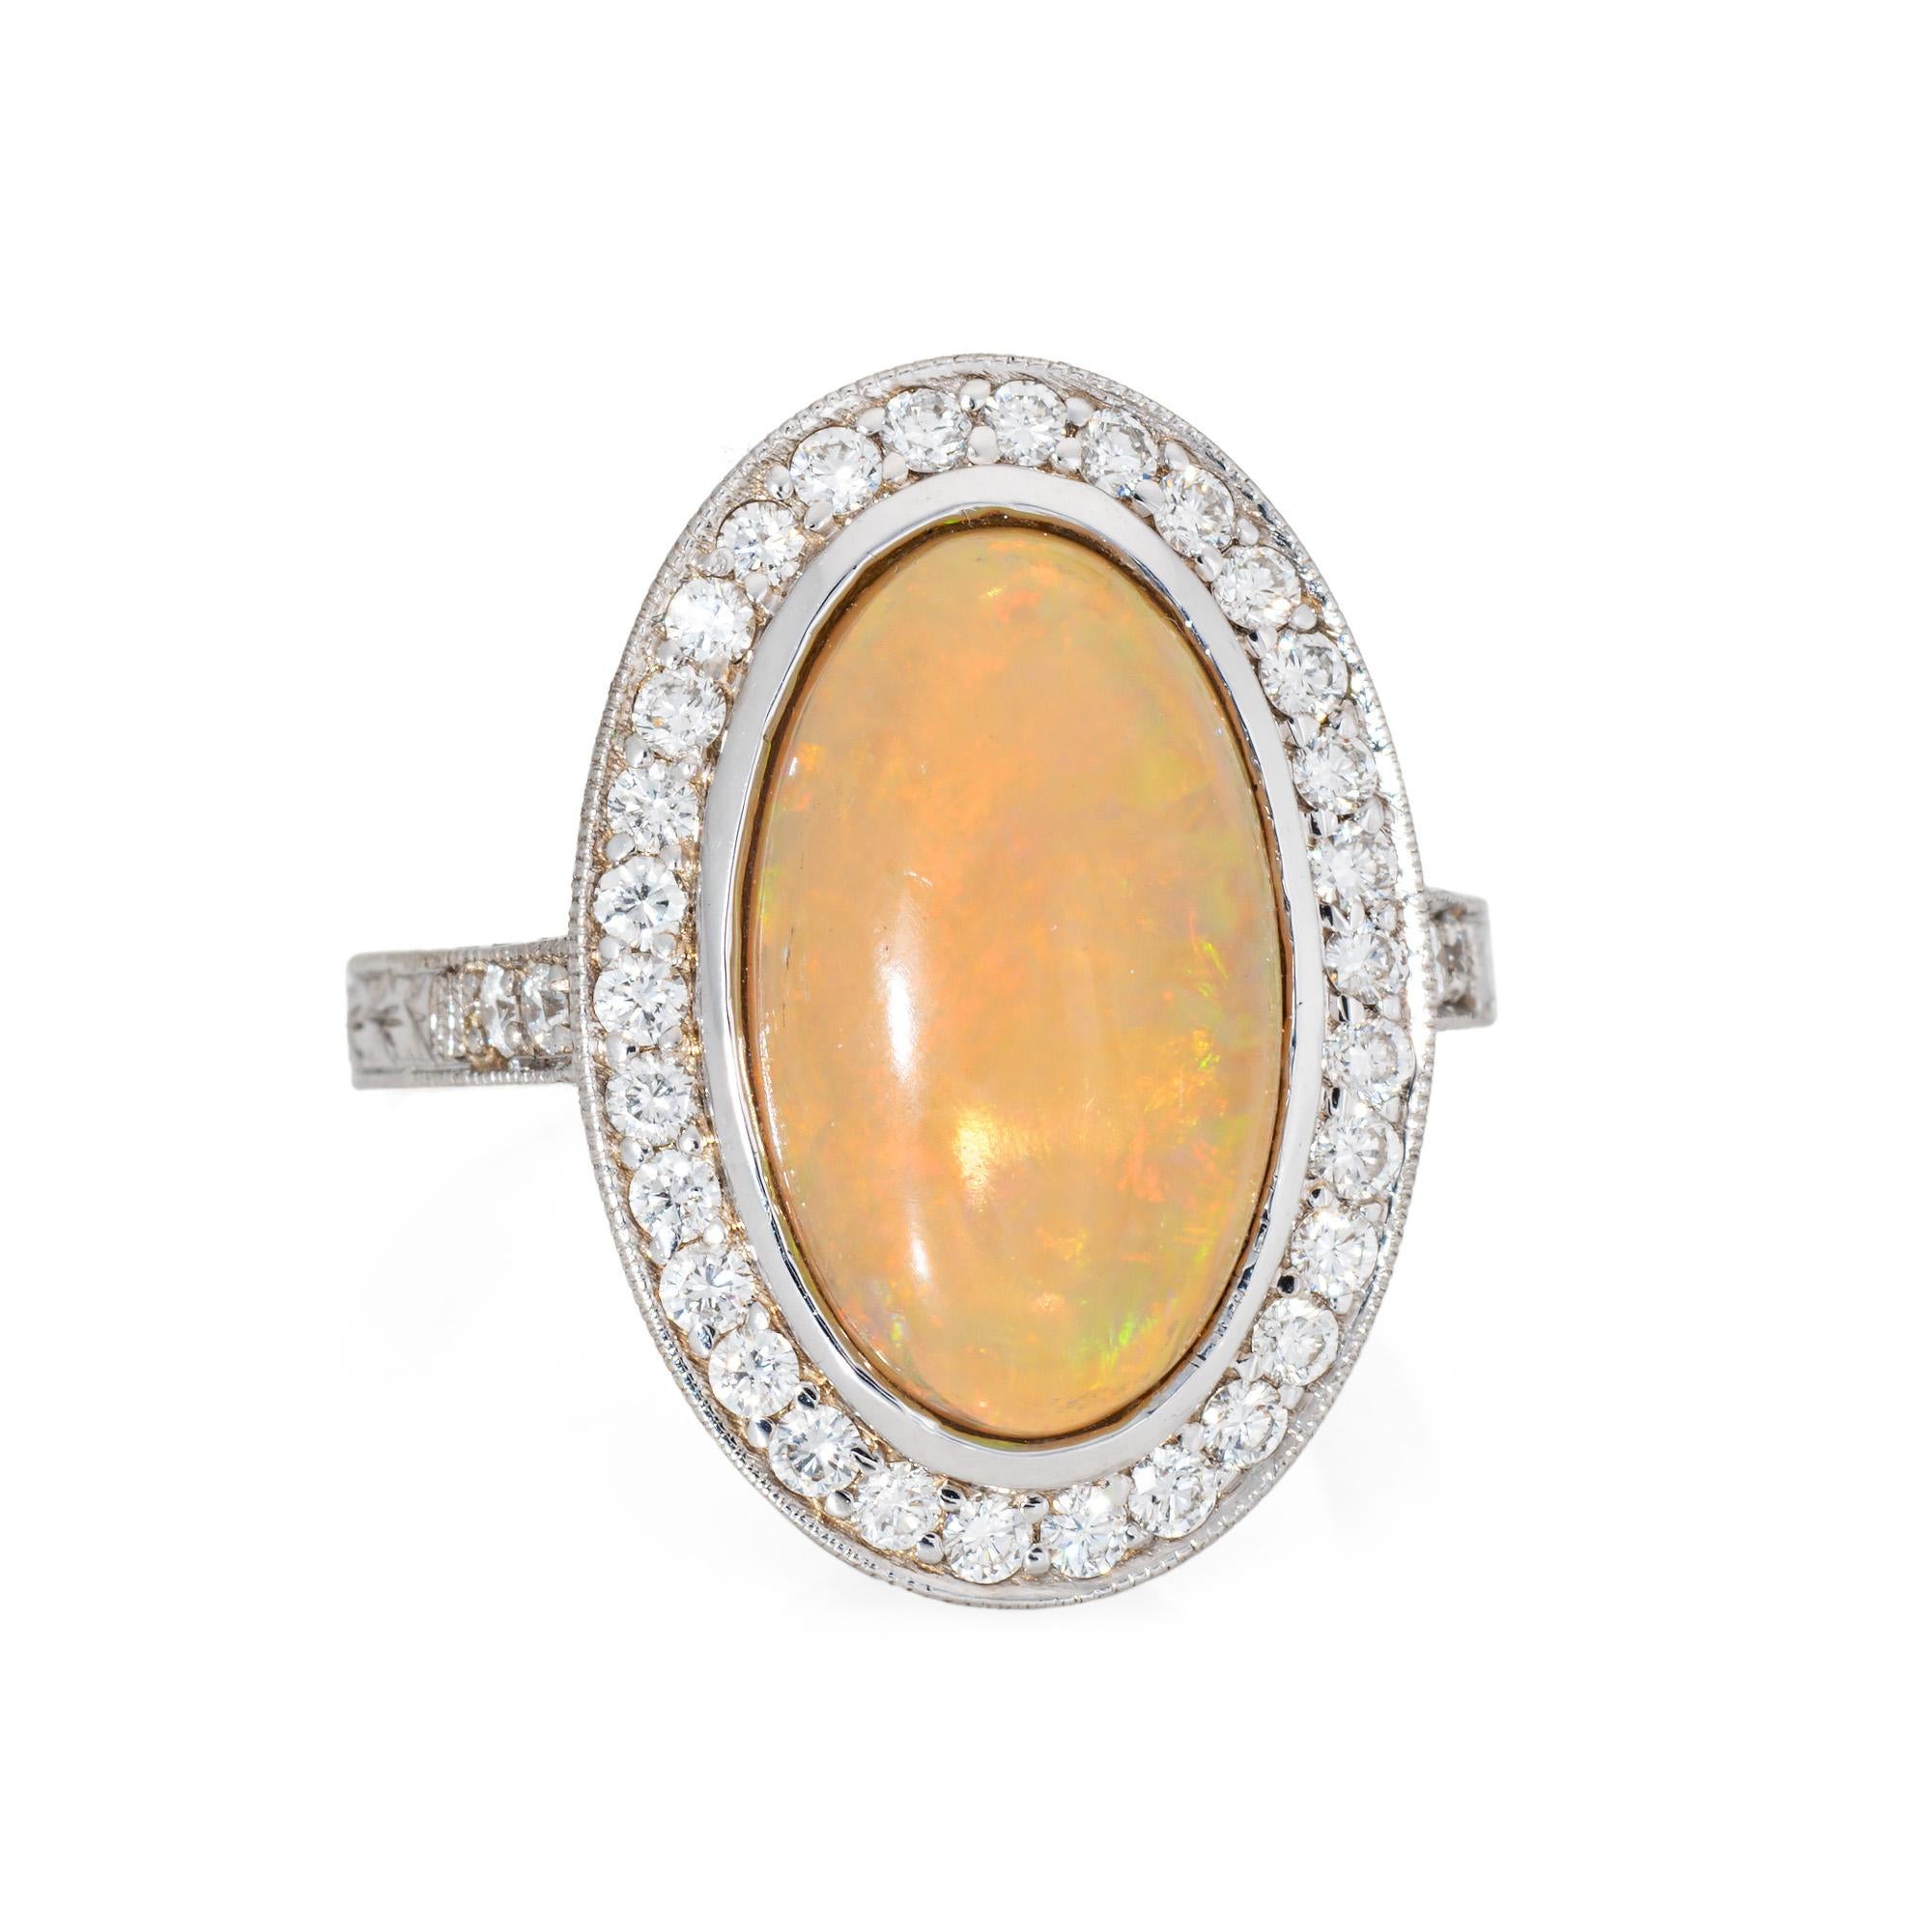 Stylish natural Ethiopian fire opal & diamond ring crafted in 18k white gold. 

Natural opal measures 16mm x 11mm (estimated at 7.50 carats). The diamonds total an estimated 0.35 carats (estimated at H-I color and VS2-SI2 clarity). The opal is in